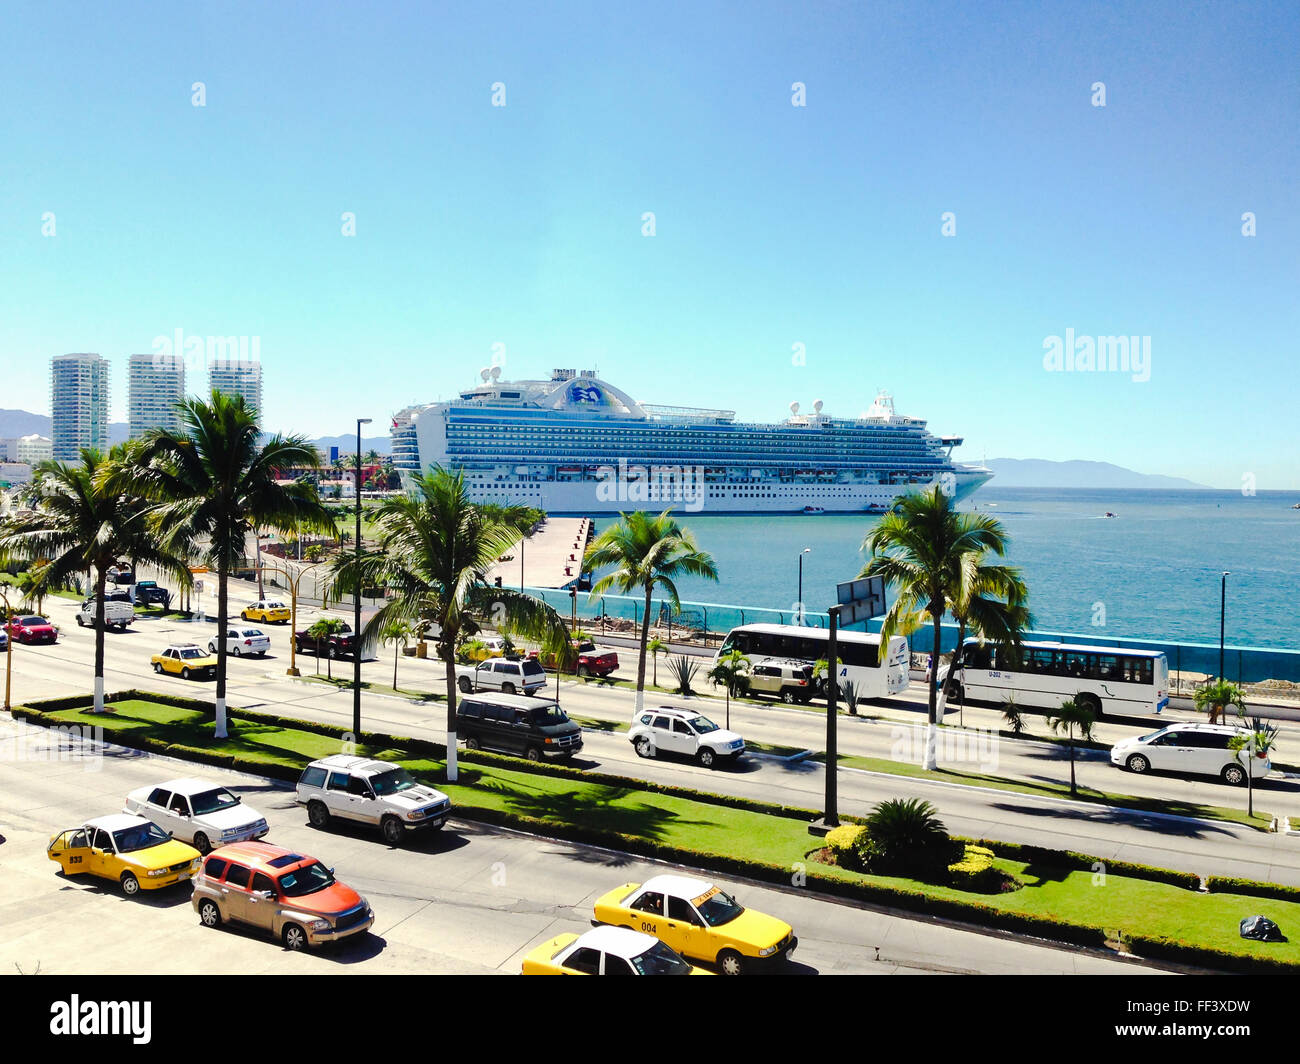 Maritime terminal with cruise ship at the cruise port in Puerto Vallarta, Jalisco, Mexico. Stock Photo